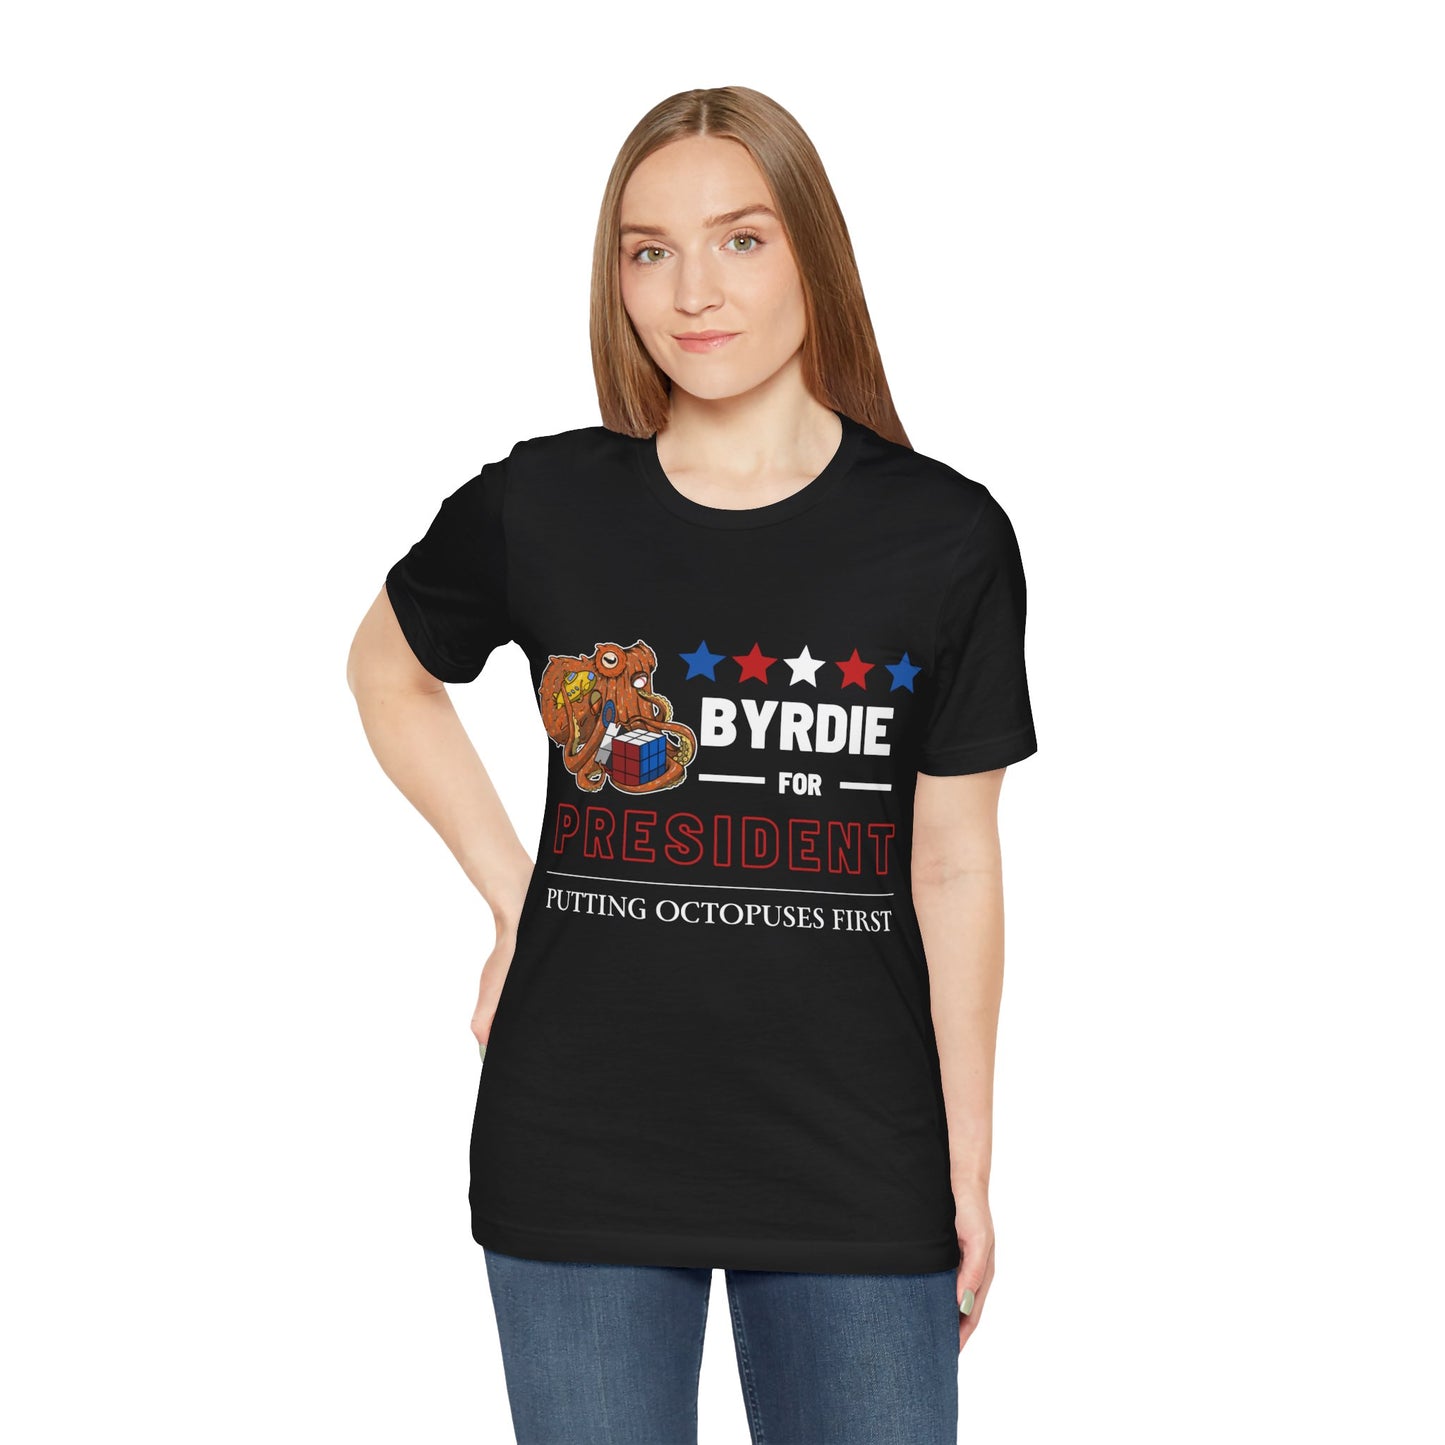 Byrdie for President - Putting Octopuses First